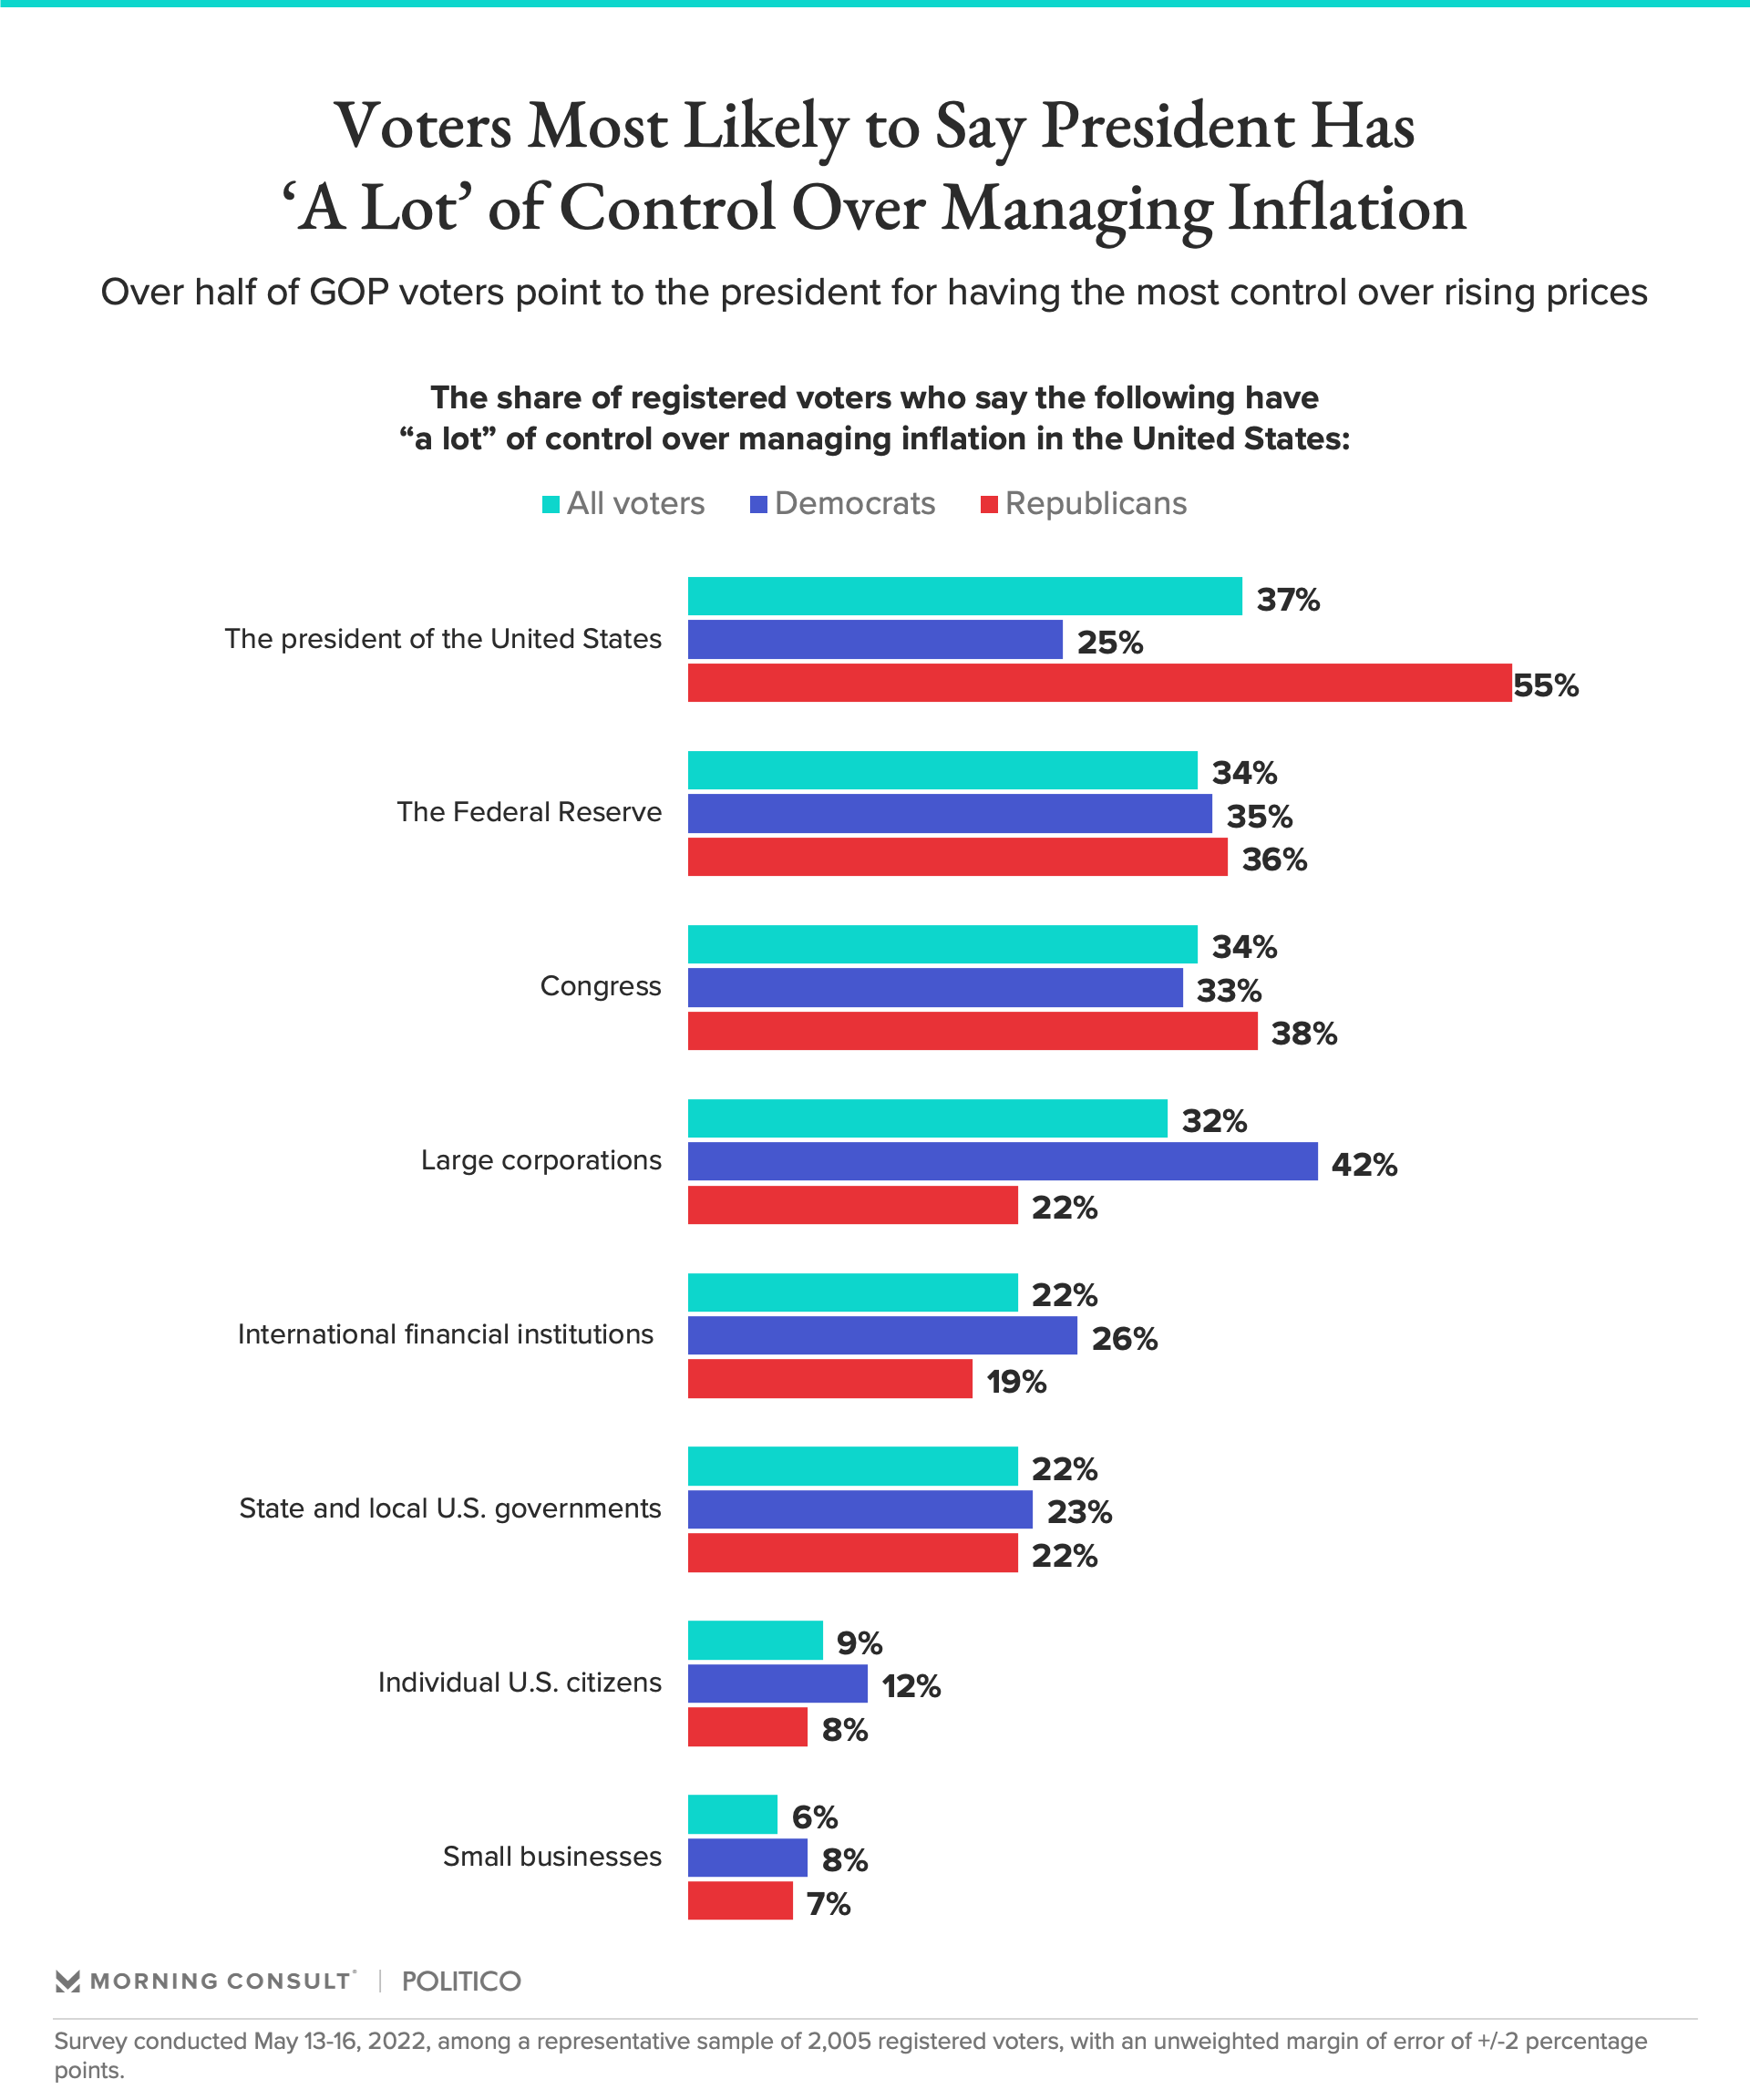 Chart conveying voters' perception of the president's control over inflation